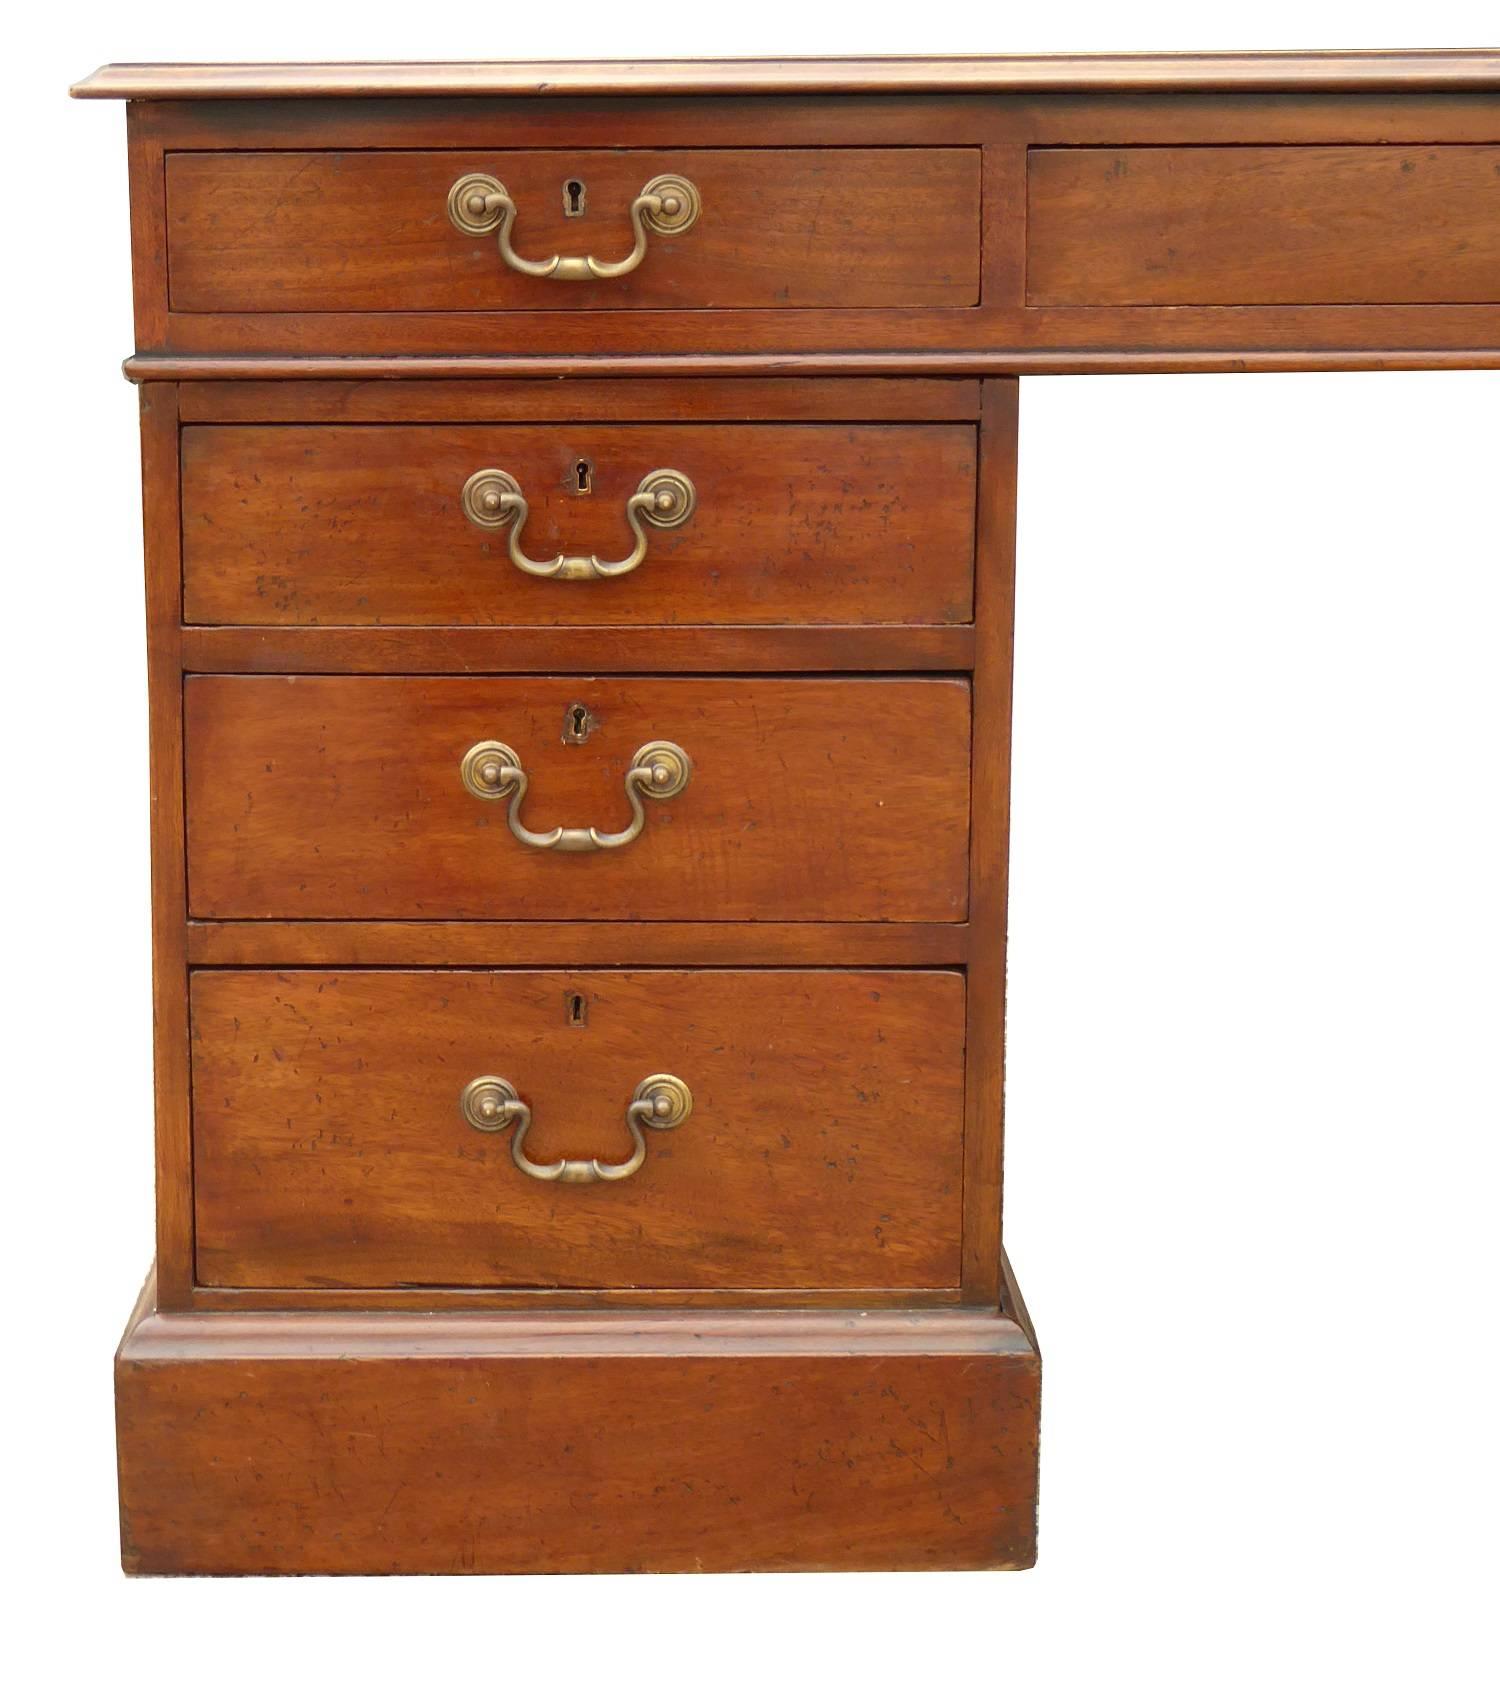 For sale is a good quality Edwardian mahogany partners desk. The top of the desk has a black leather, with decorative gold tooling. The top of the desk has three drawers on each side, one long in the centre flanked by a short drawer on either side.